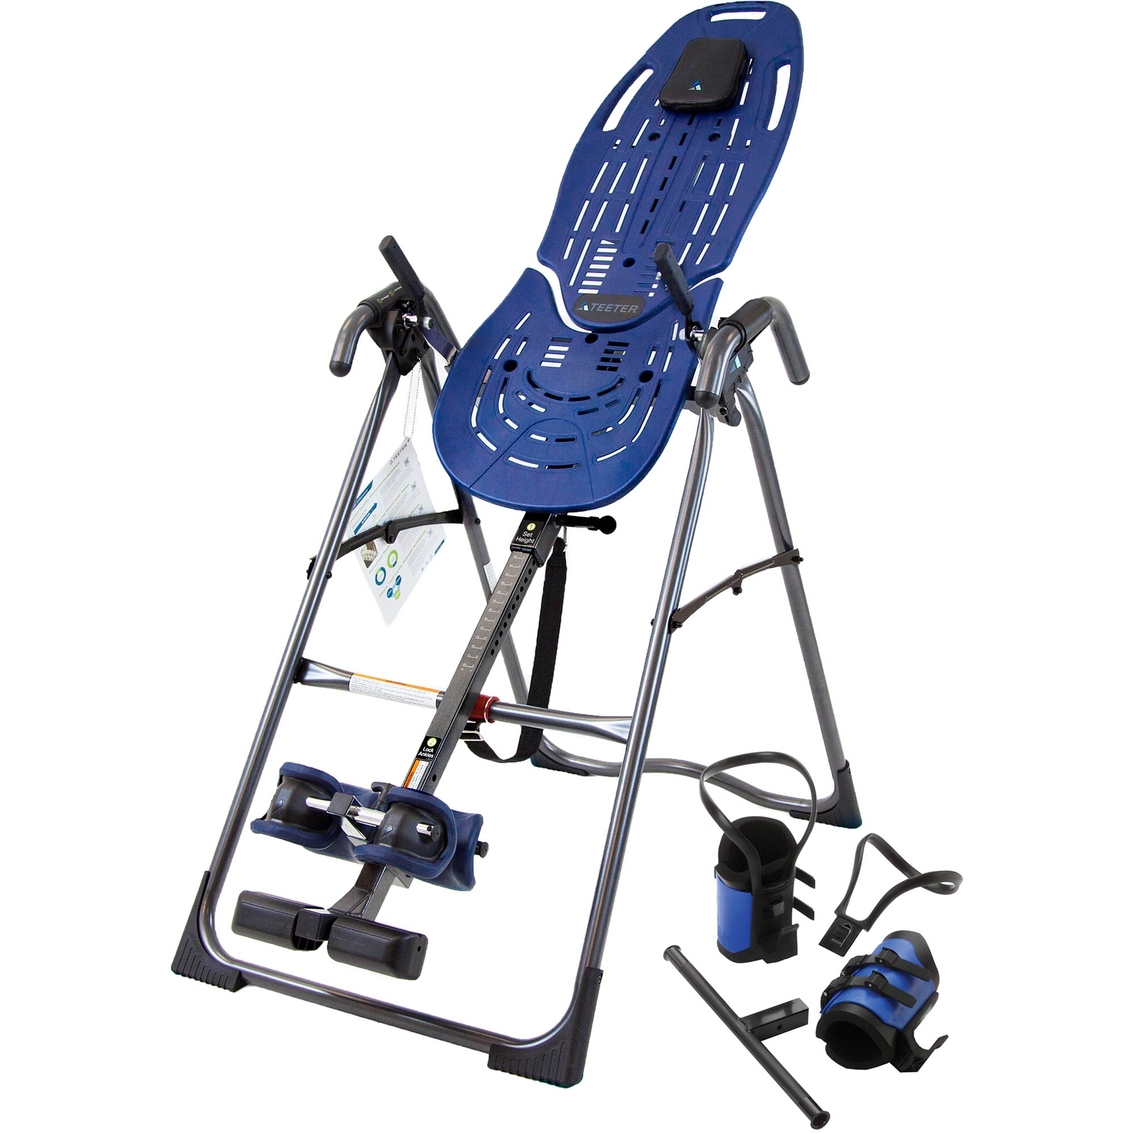 Teeter EP-560 Sport Ed. Inversion Table with Gravity Boots and Back Pain Relief DVD